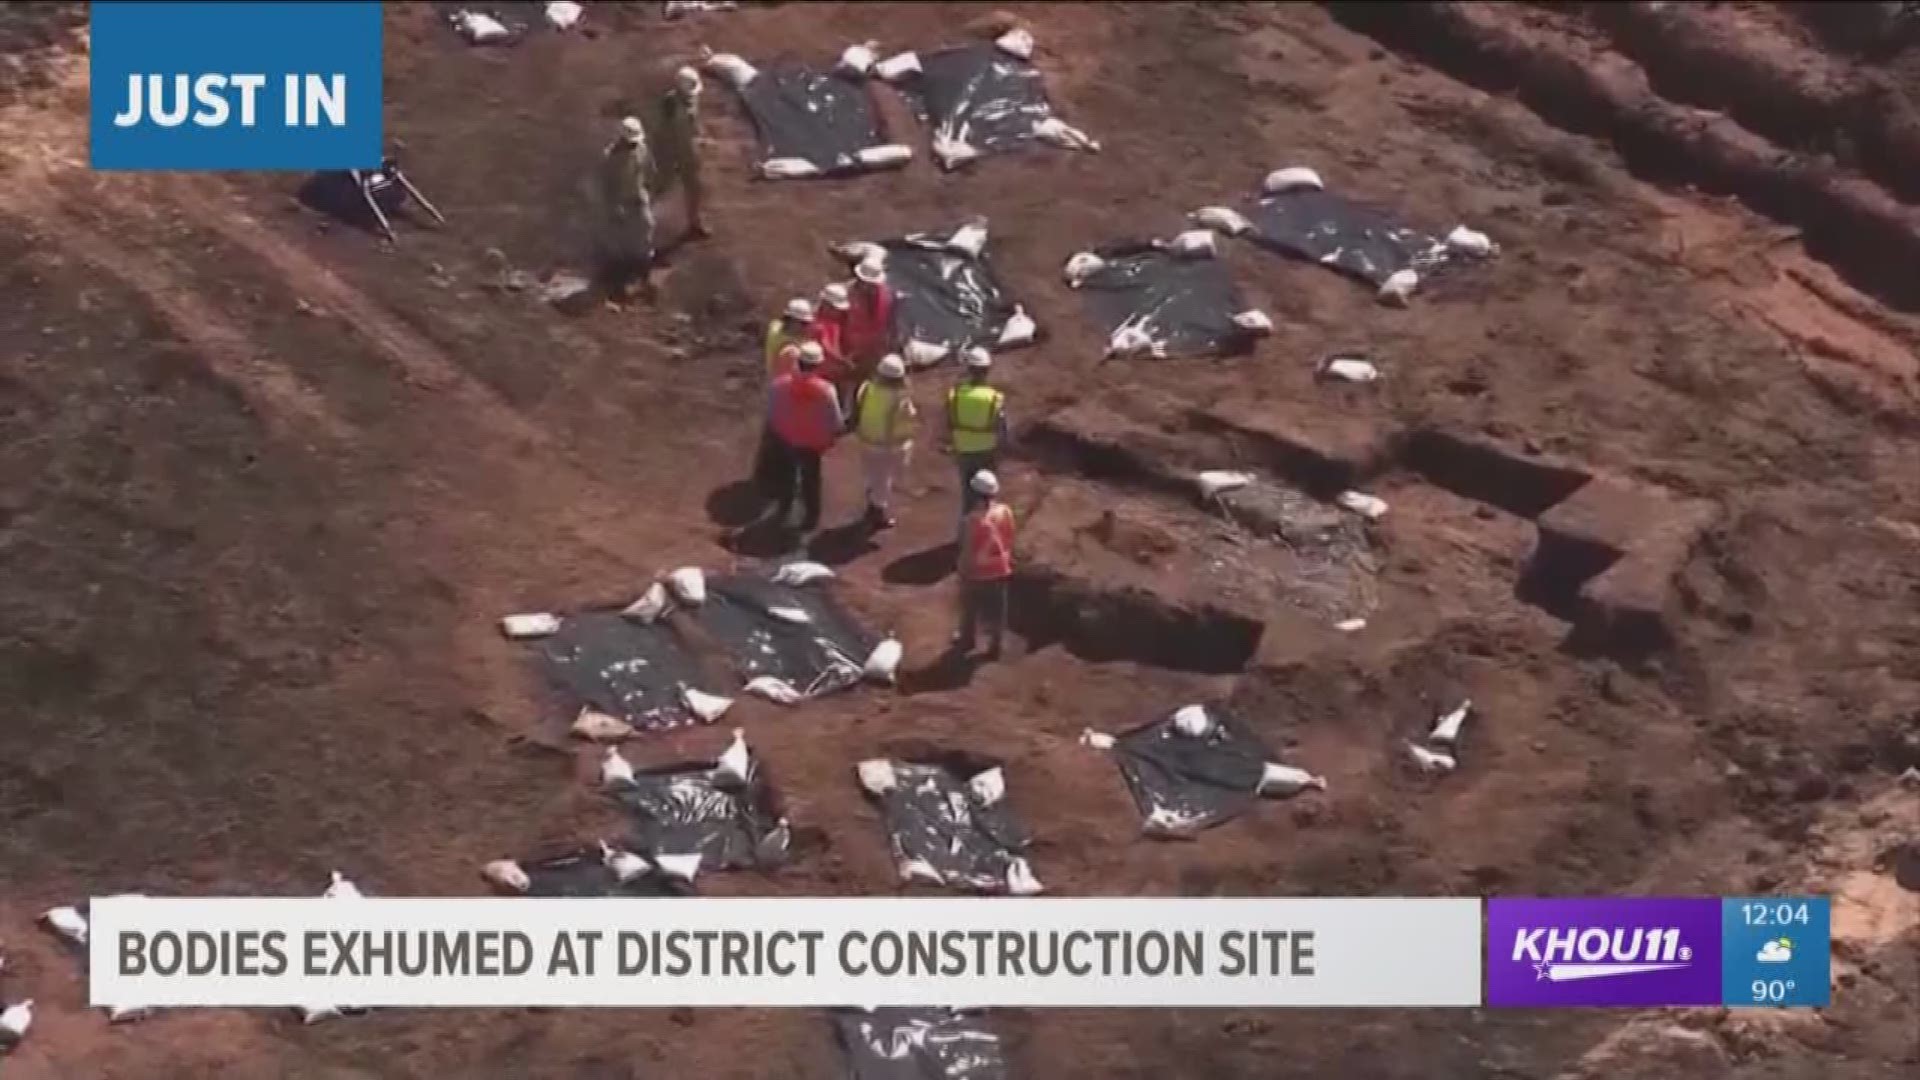 So far 48 bodies have been exhumed at a Fort Bend ISD construction site that was also an unmarked cemetery. 